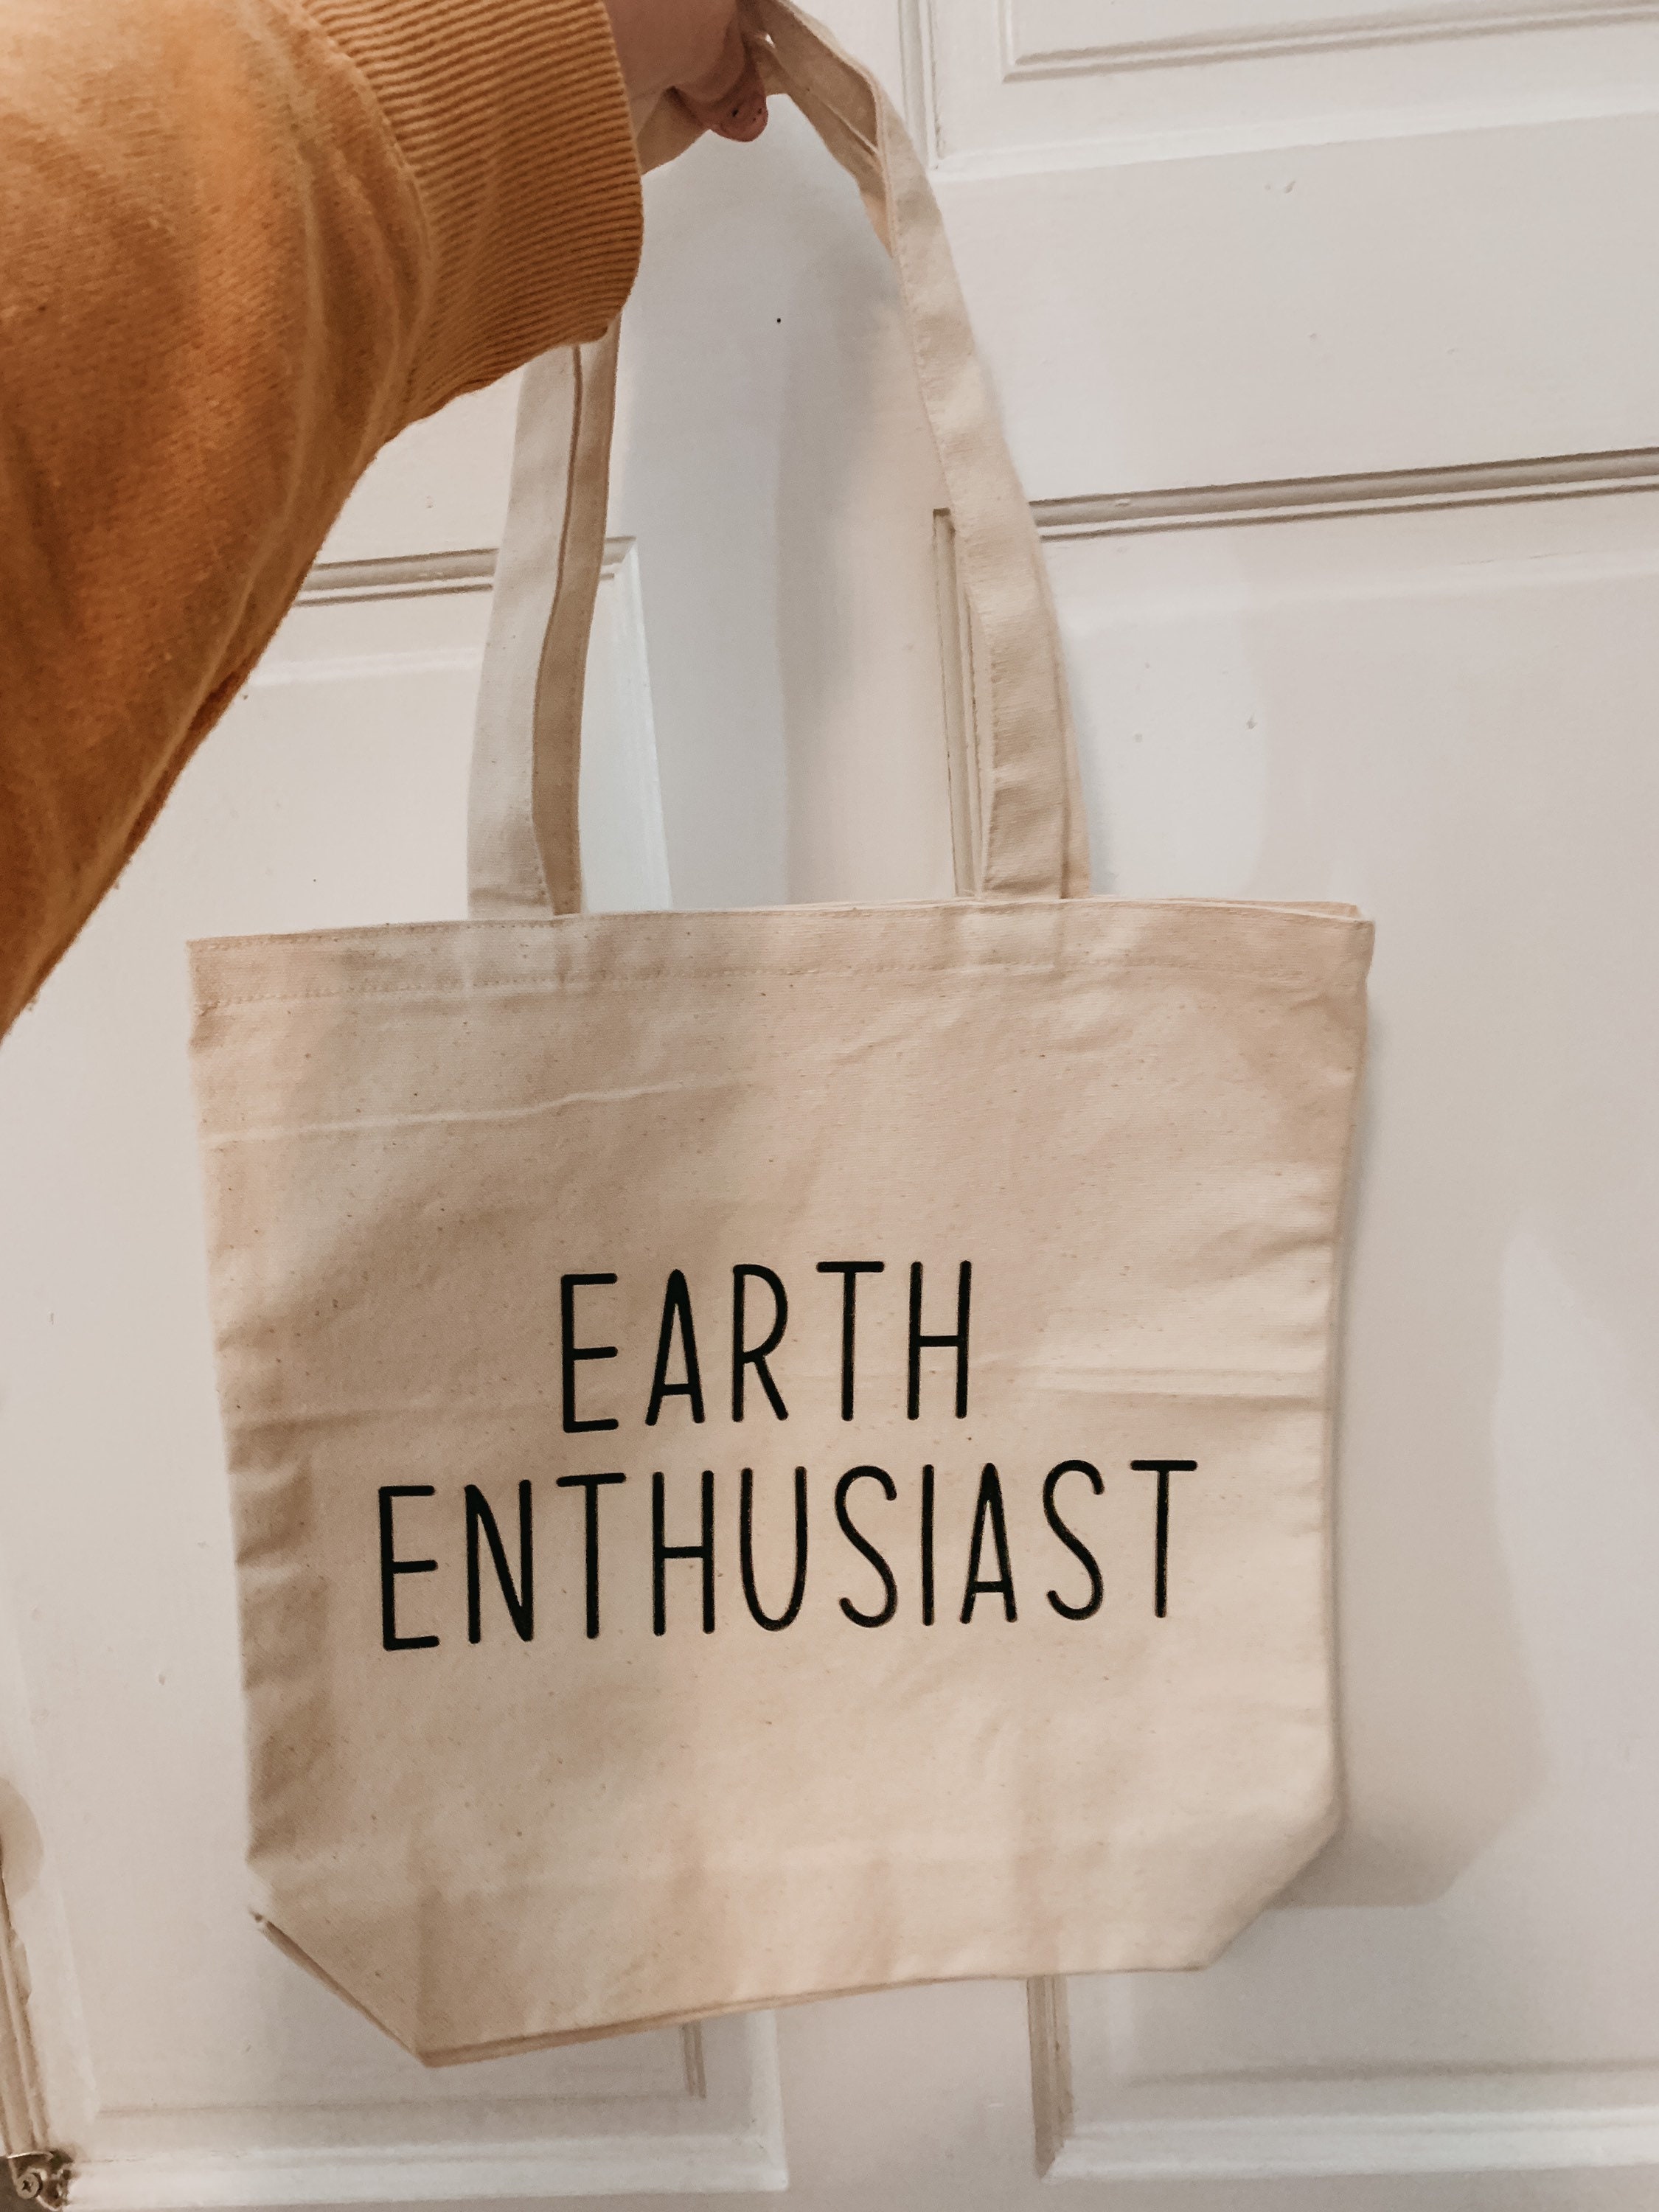 Earth Enthusiast Canvas Tote tote bag carryall raise | Etsy